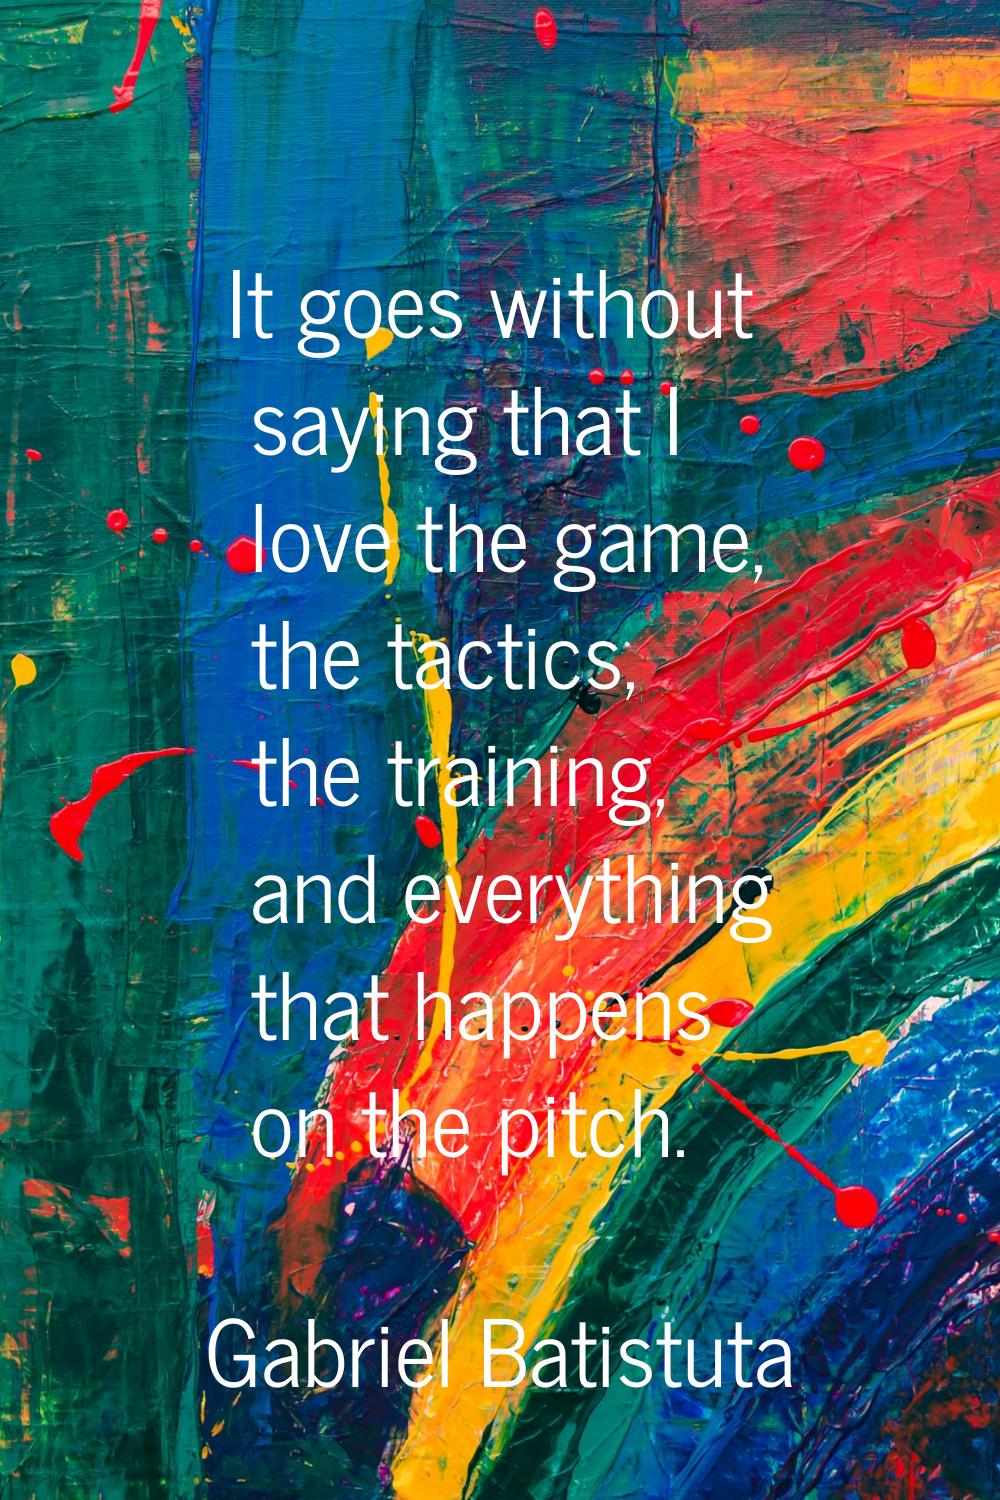 It goes without saying that I love the game, the tactics, the training, and everything that happens